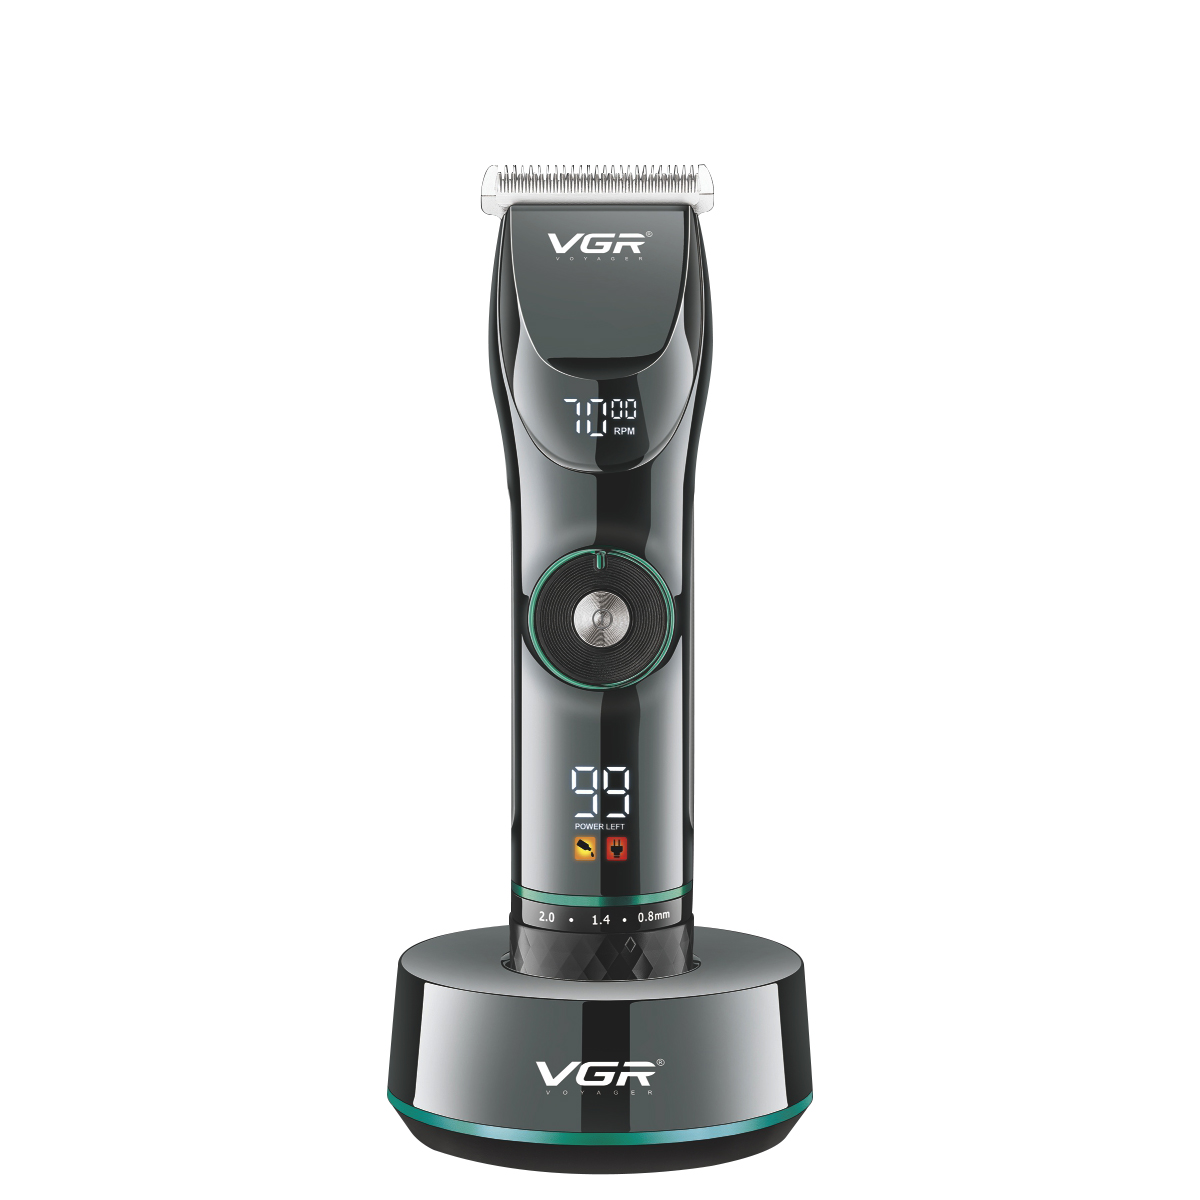 VGR V-256 Professional Cordless Rechargeable best barber supplies hair clippers trimmer hair cutting machine for Men